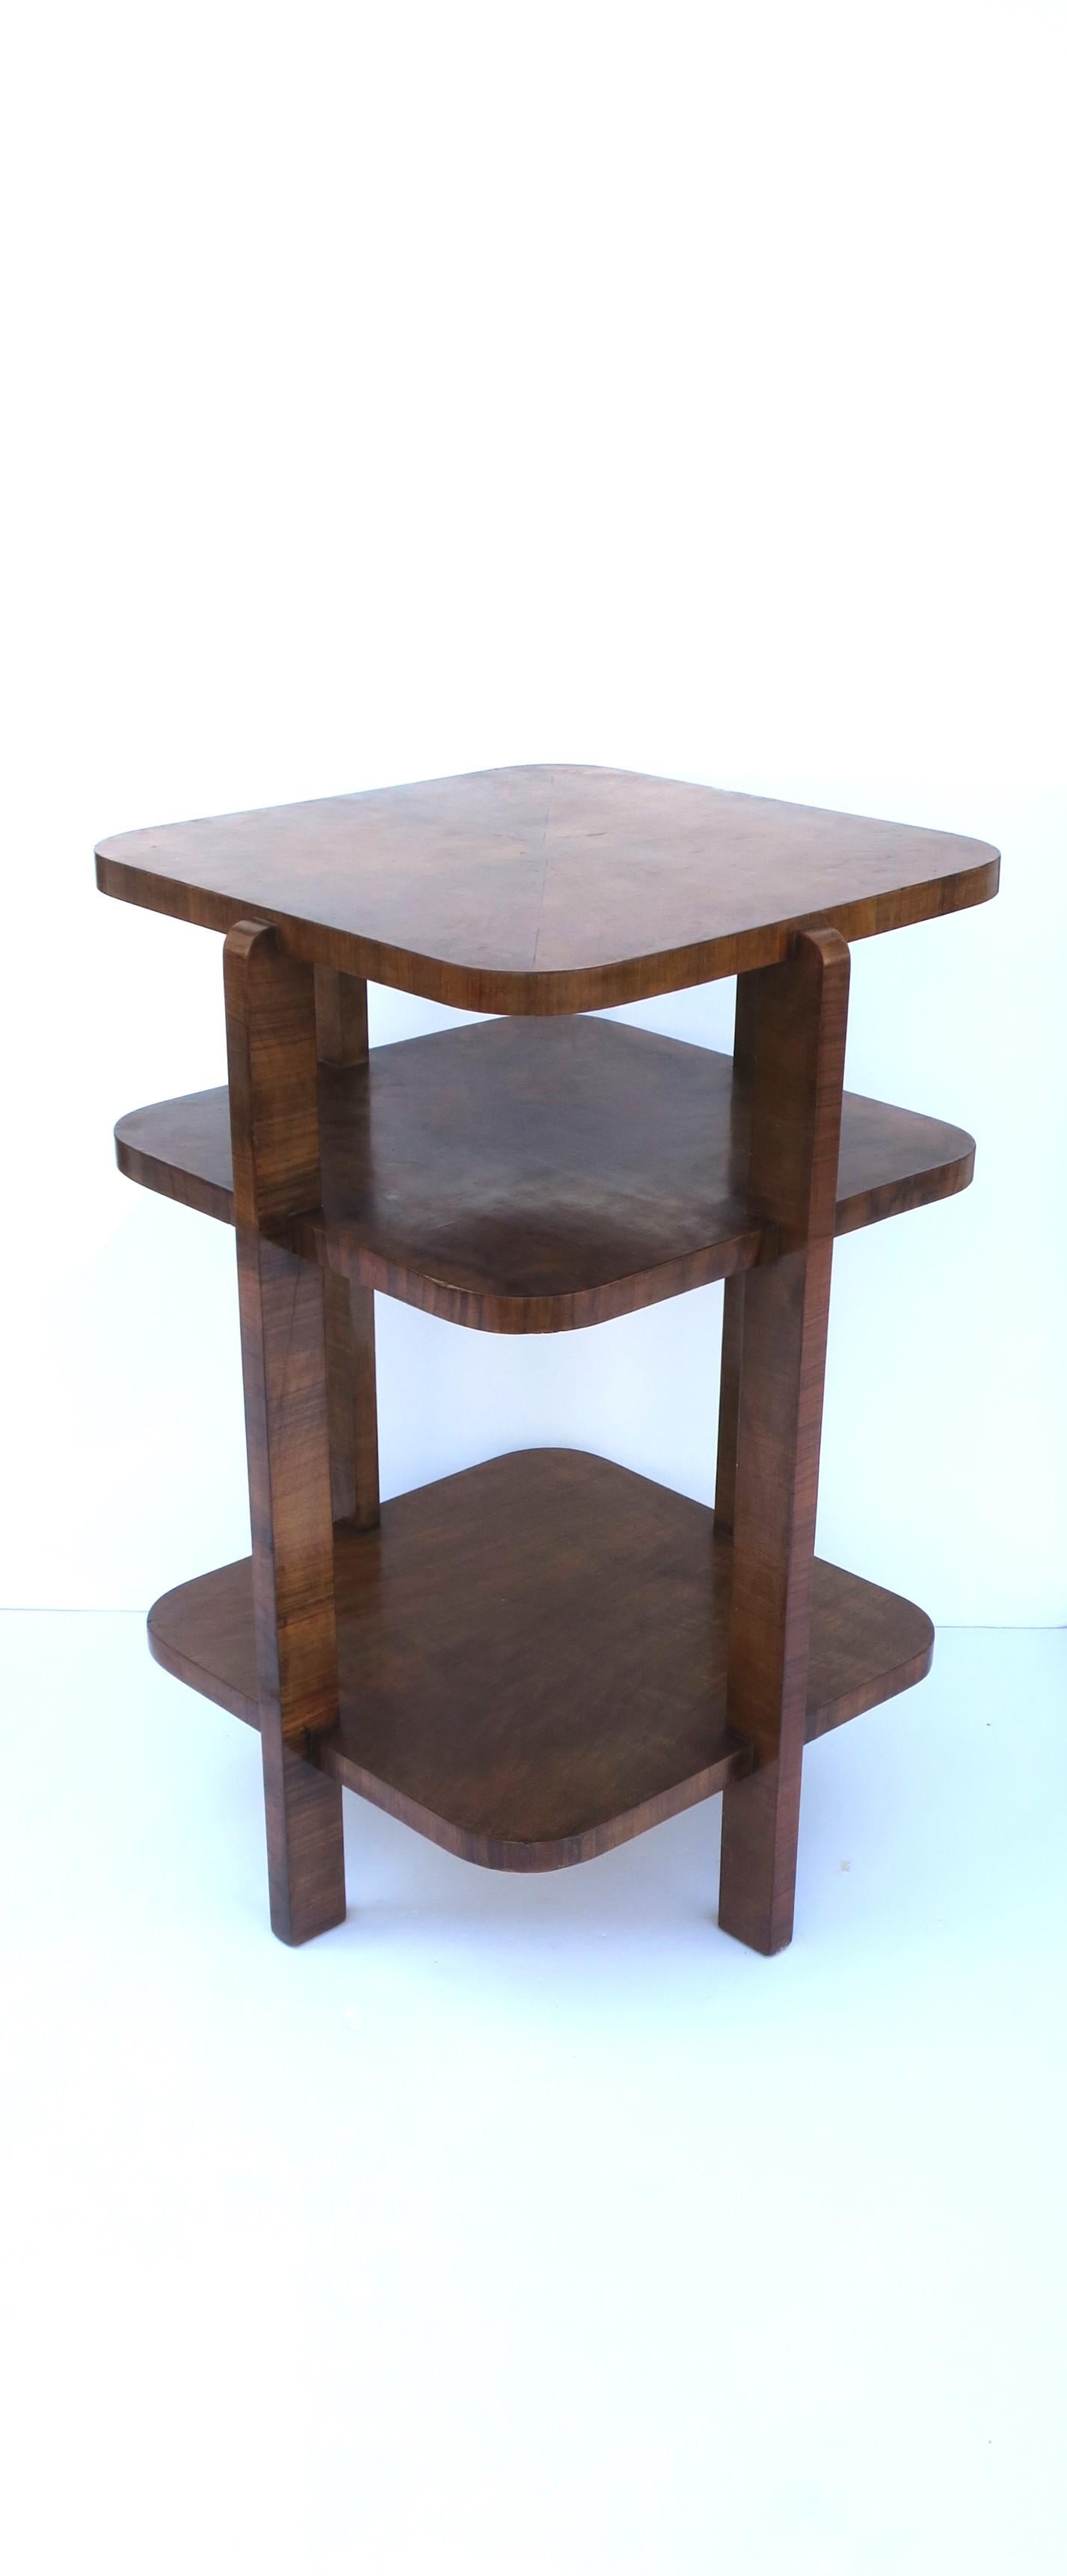 European Art Deco Tiger Maple Wood Drink Side End Table with Shelves